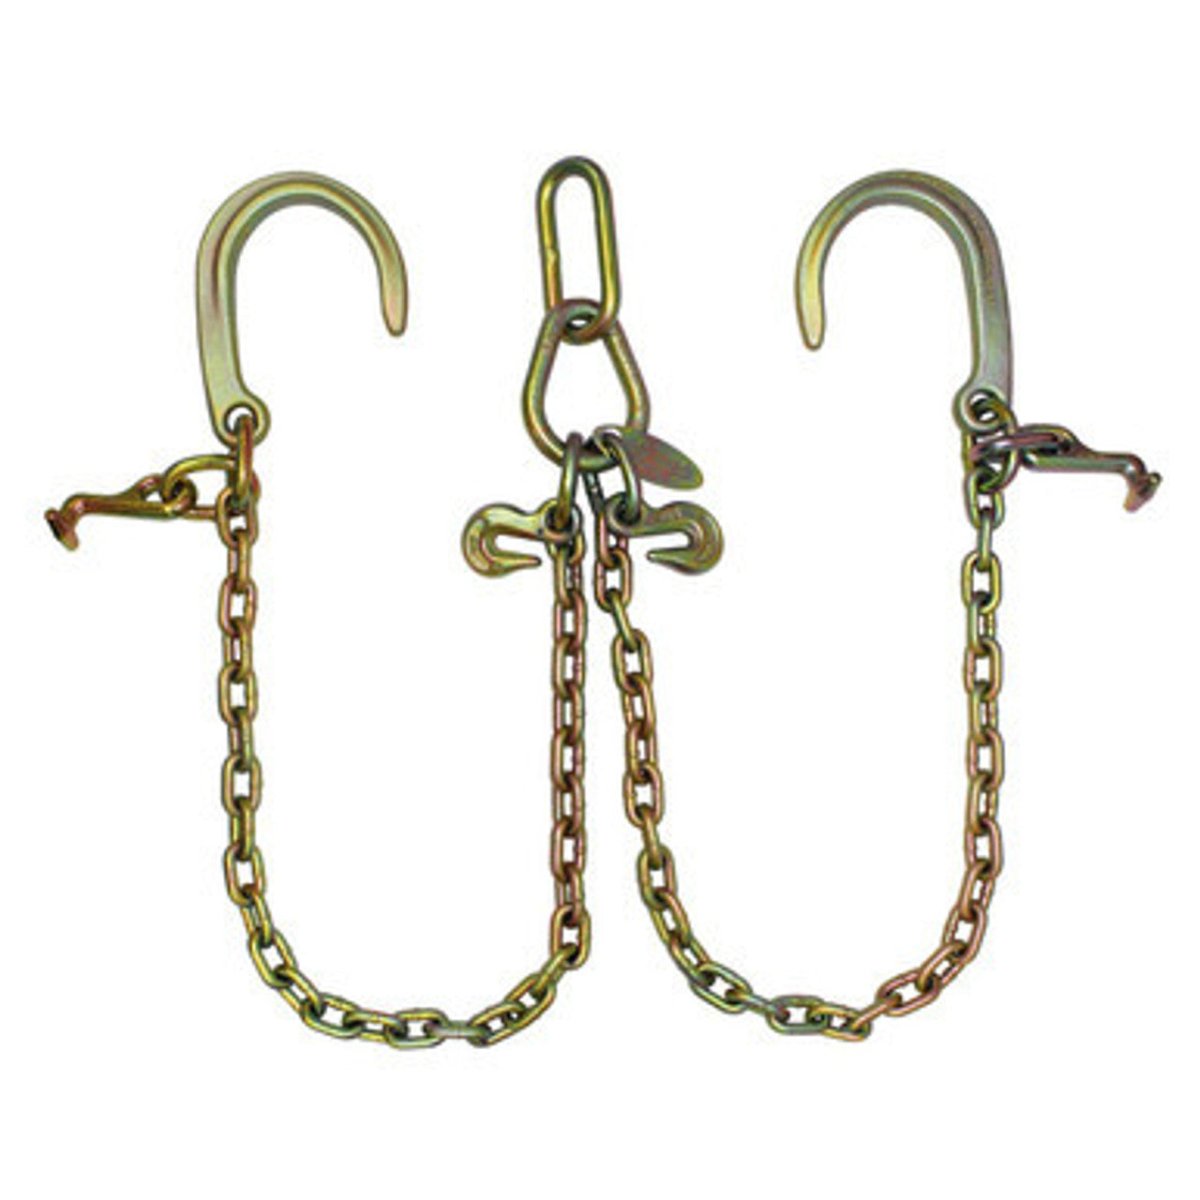 B/A Products Co. 5/16” Low-Profile Grade 70 T & 8” J Hook V-Chain - starequipmentsales